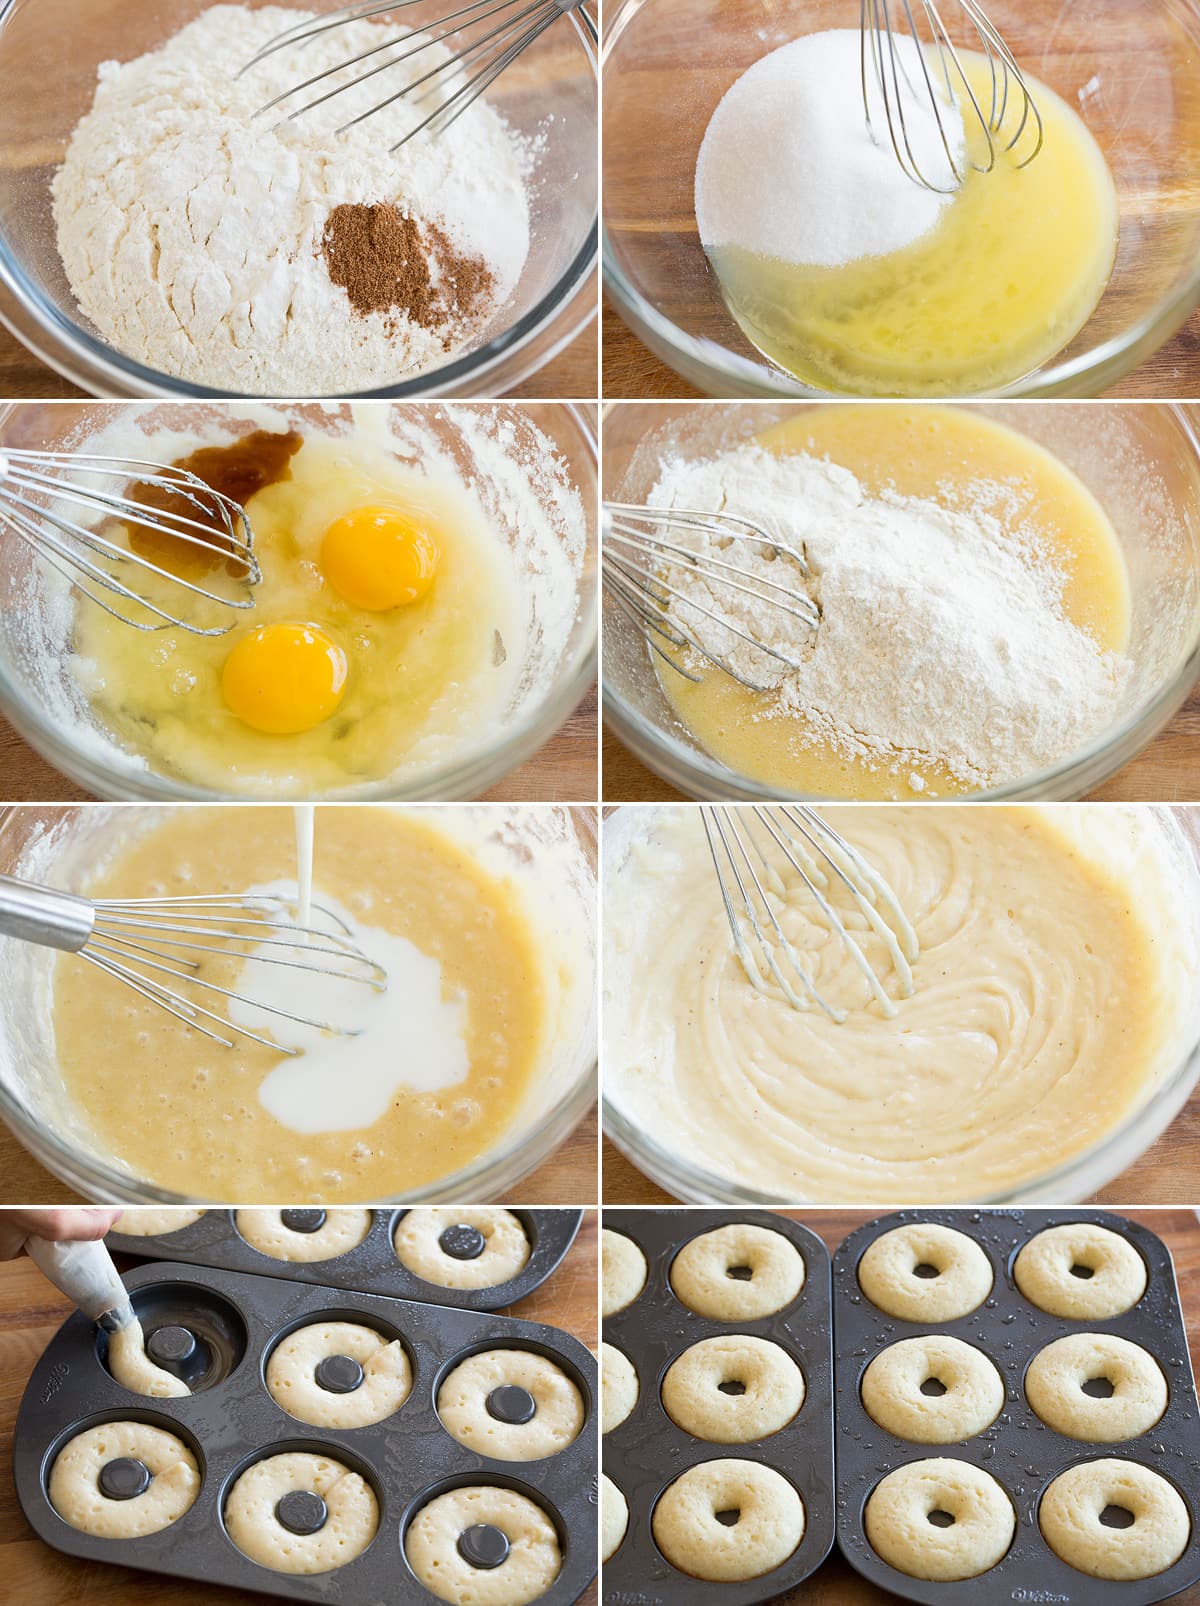 Collage of eight photos showing steps to making baked donuts. Includes preparing batter in glass mixing bowl with a whisk, then piping into donut pans. Also shows after baking.